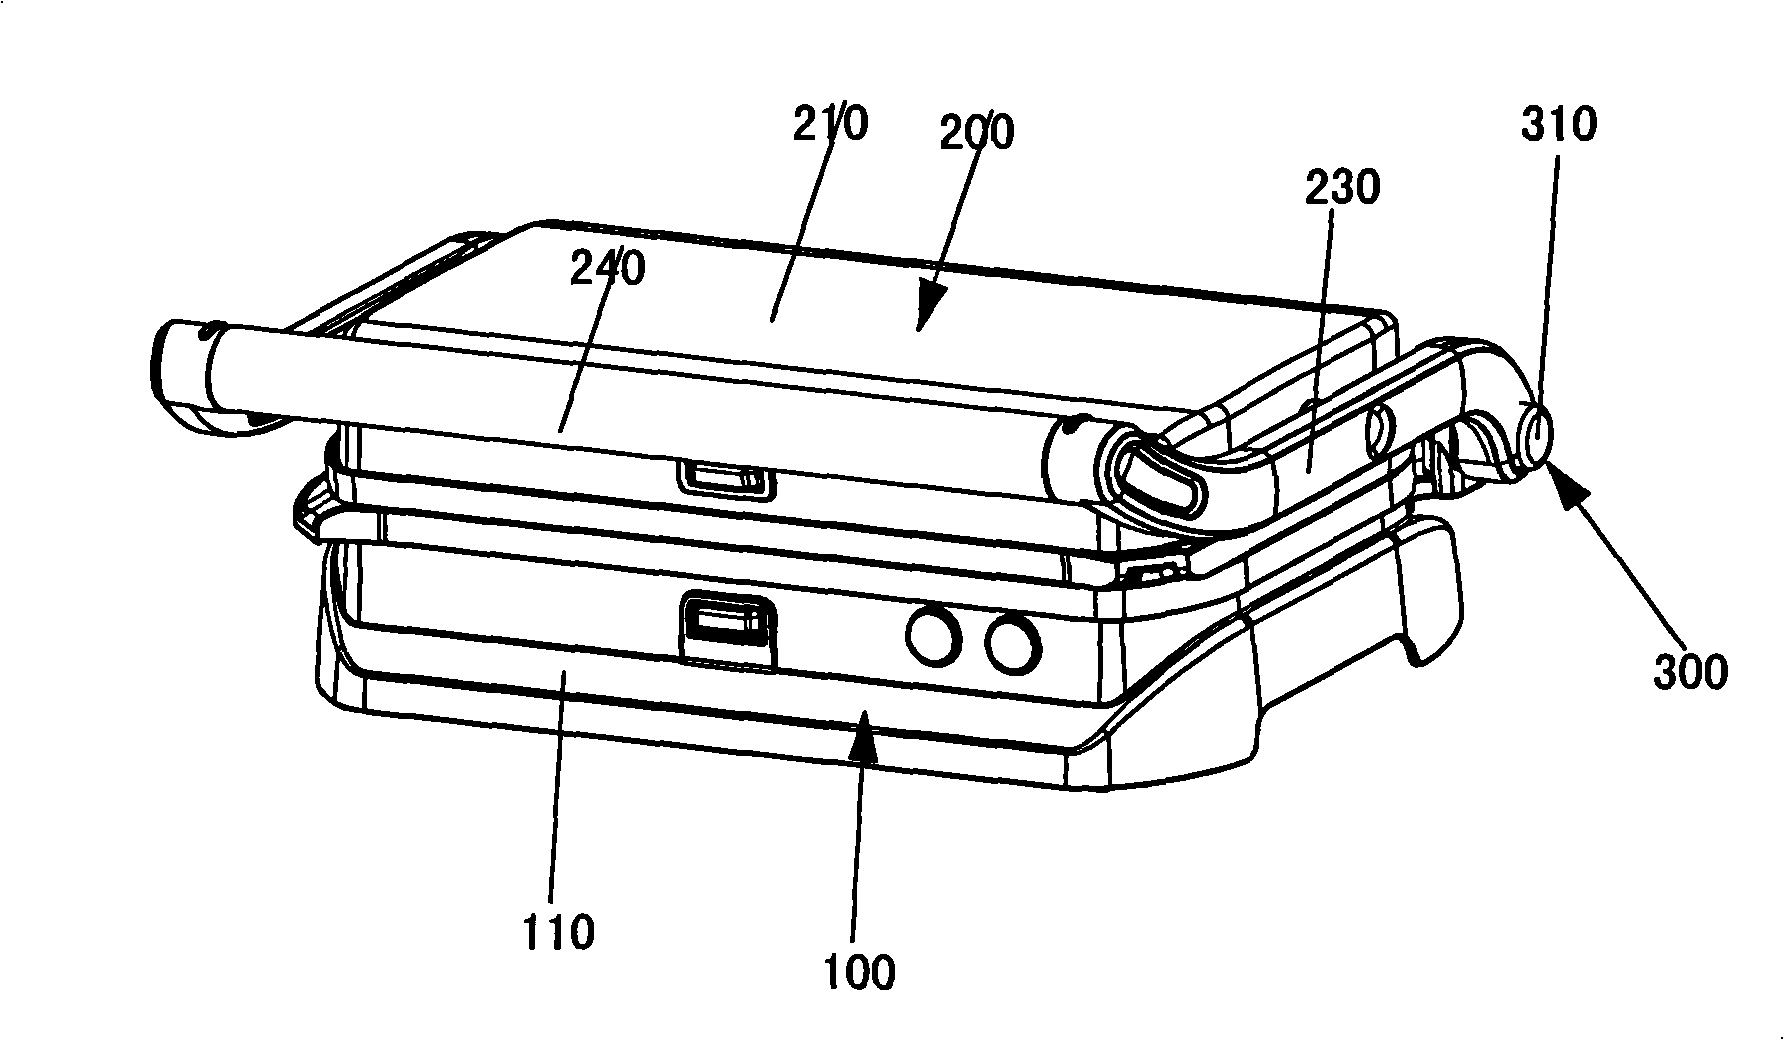 Frying and roasting device